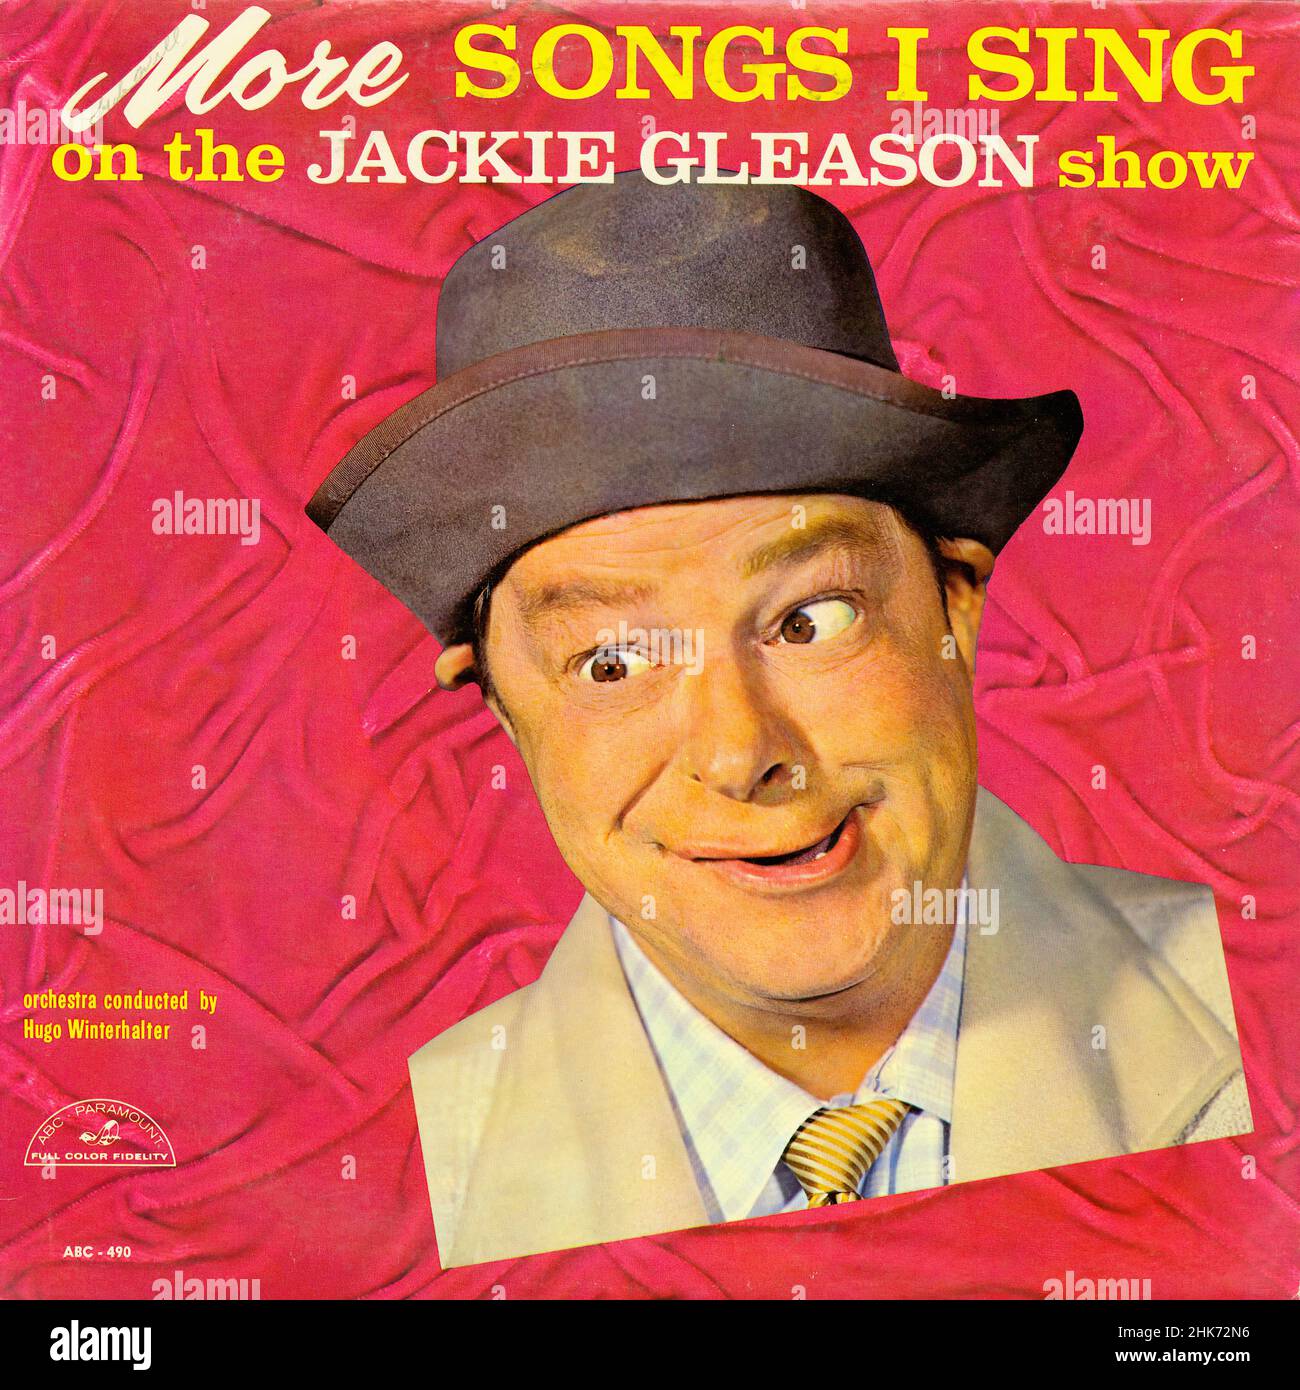 More Songs i Sing on the Jackie Gleason Show - Vintage American Comedy Vinyl Album Foto Stock